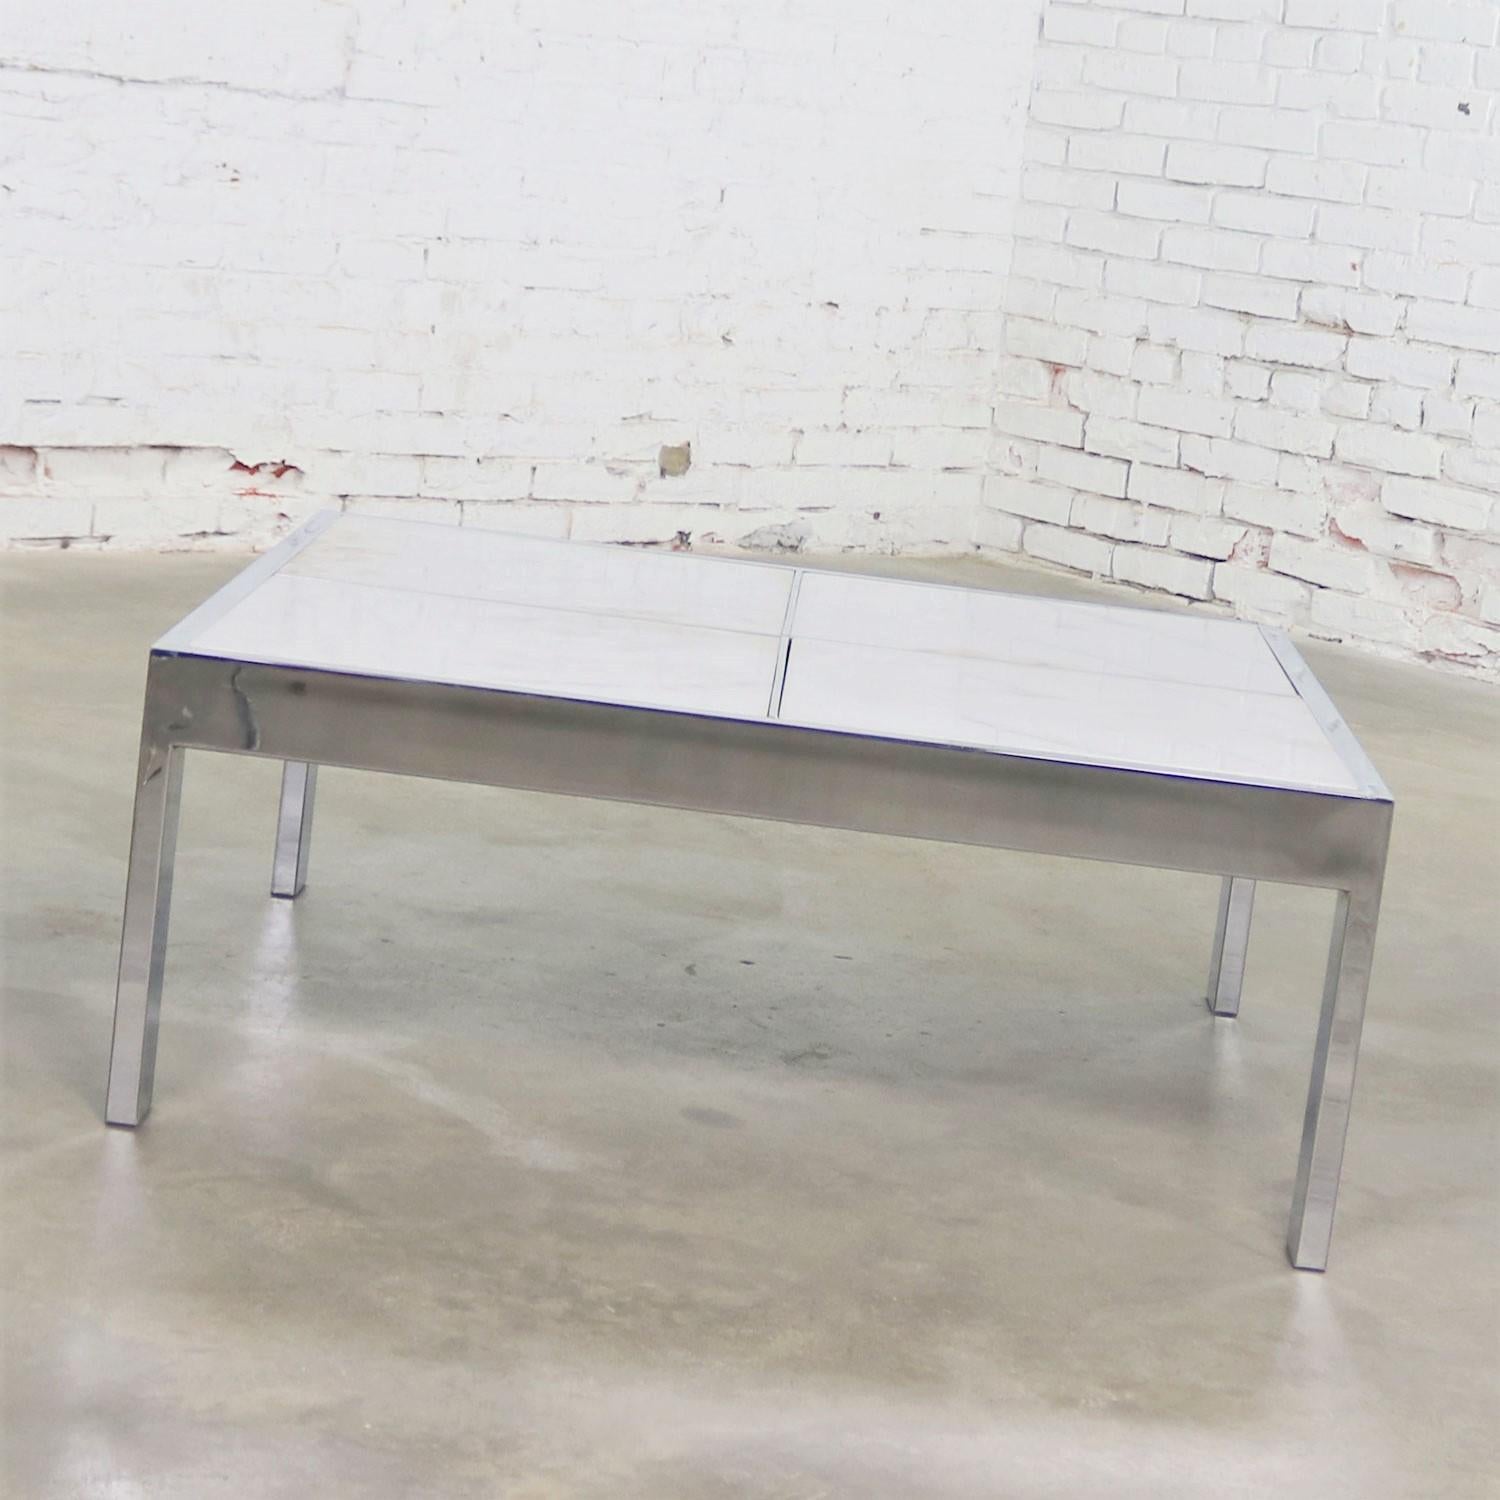 Modern Chrome and White Marble Coffee Table Attributed to the Pace Collection For Sale 6